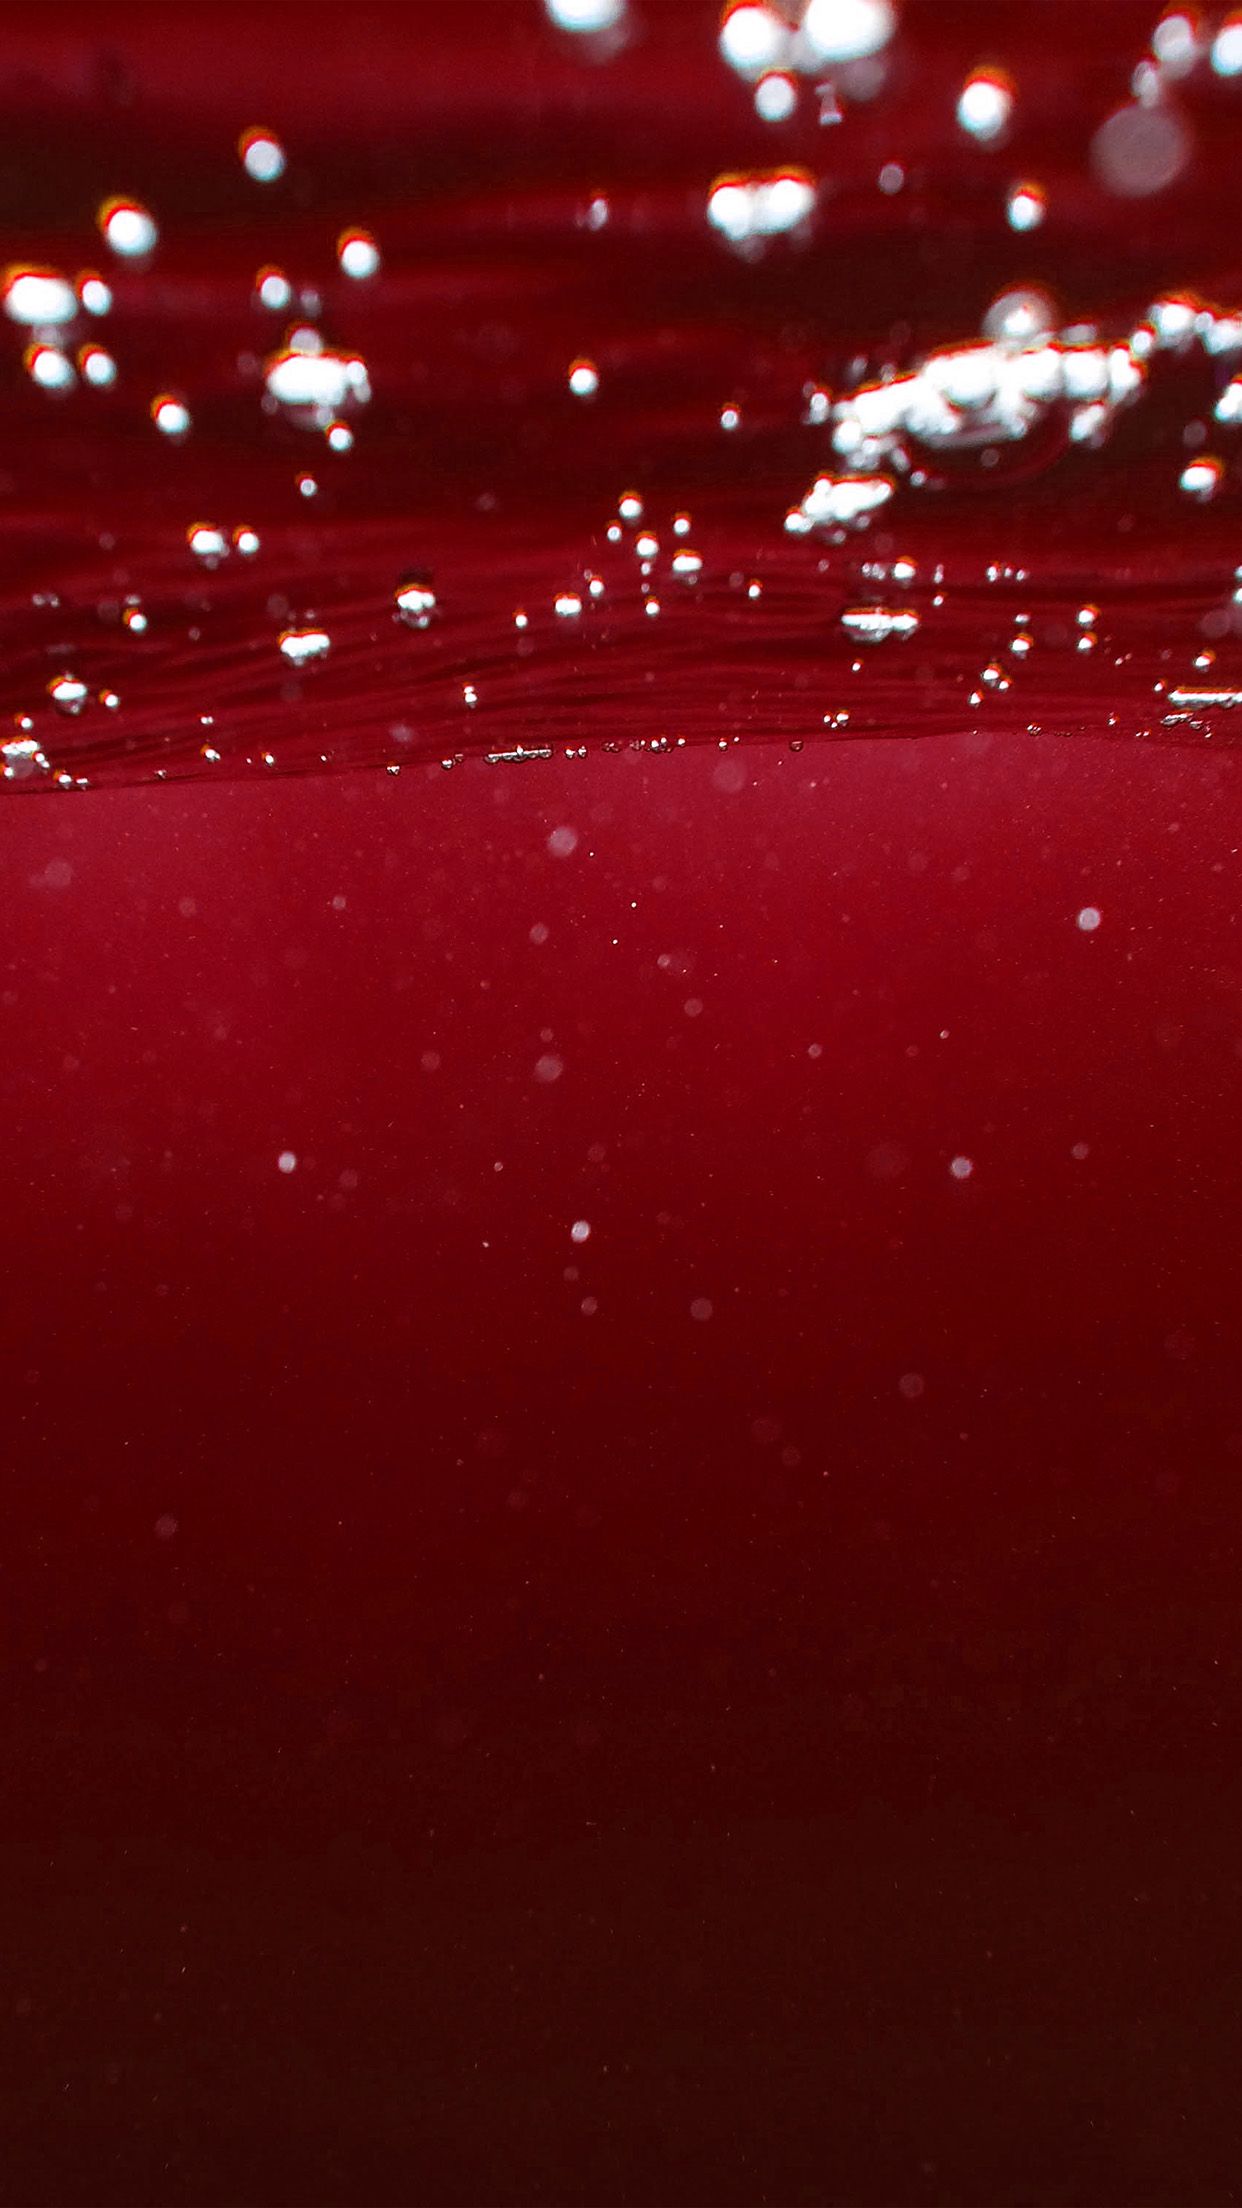 A close up of a red liquid with bubbles in it - Dark red, underwater